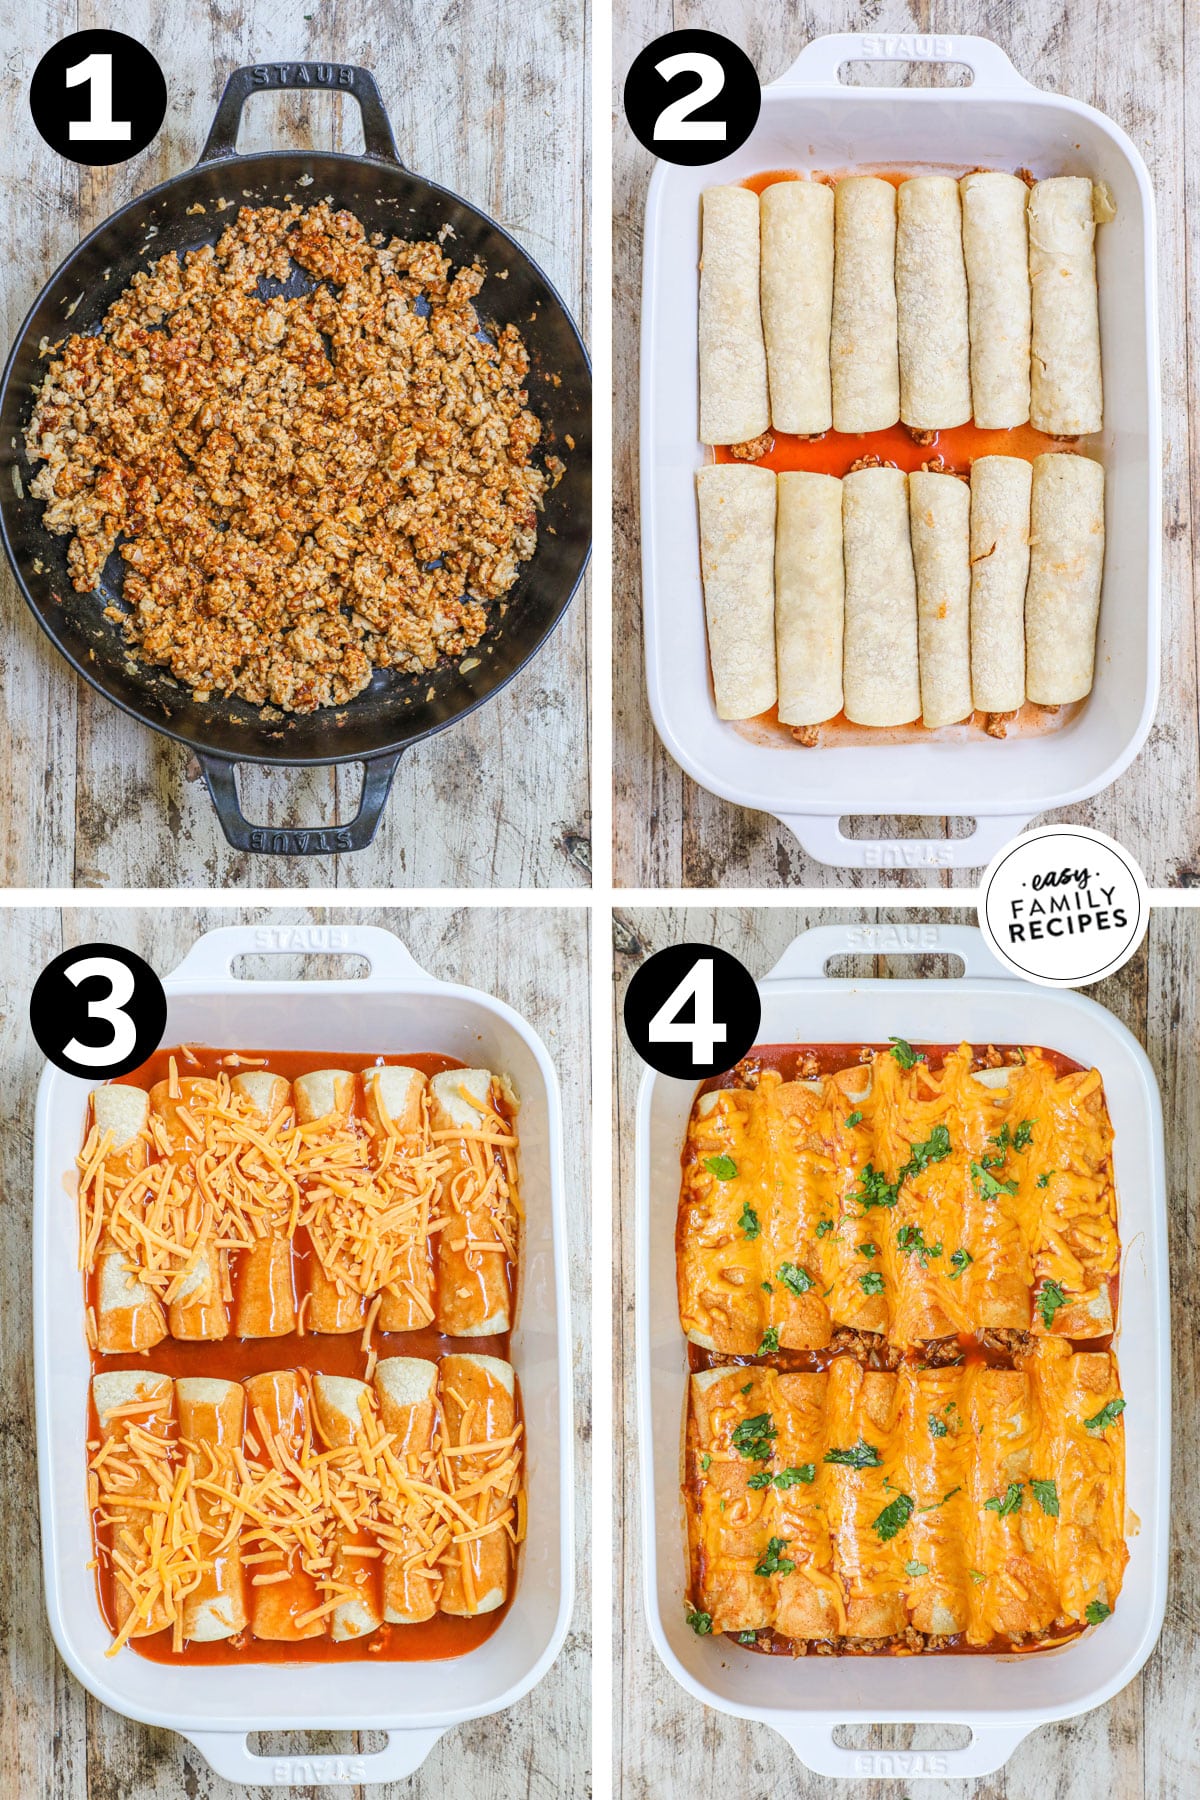 4 image collage making recipe: 1-ground turkey, onions, and seasoning after cooking in a skillet, 2- corn tortillas with meat mixture rolled up in a baking dish, 3- enchilada sauce and cheese added on top, 4- after baking to show melty cheese and garnished with fresh cilantro.